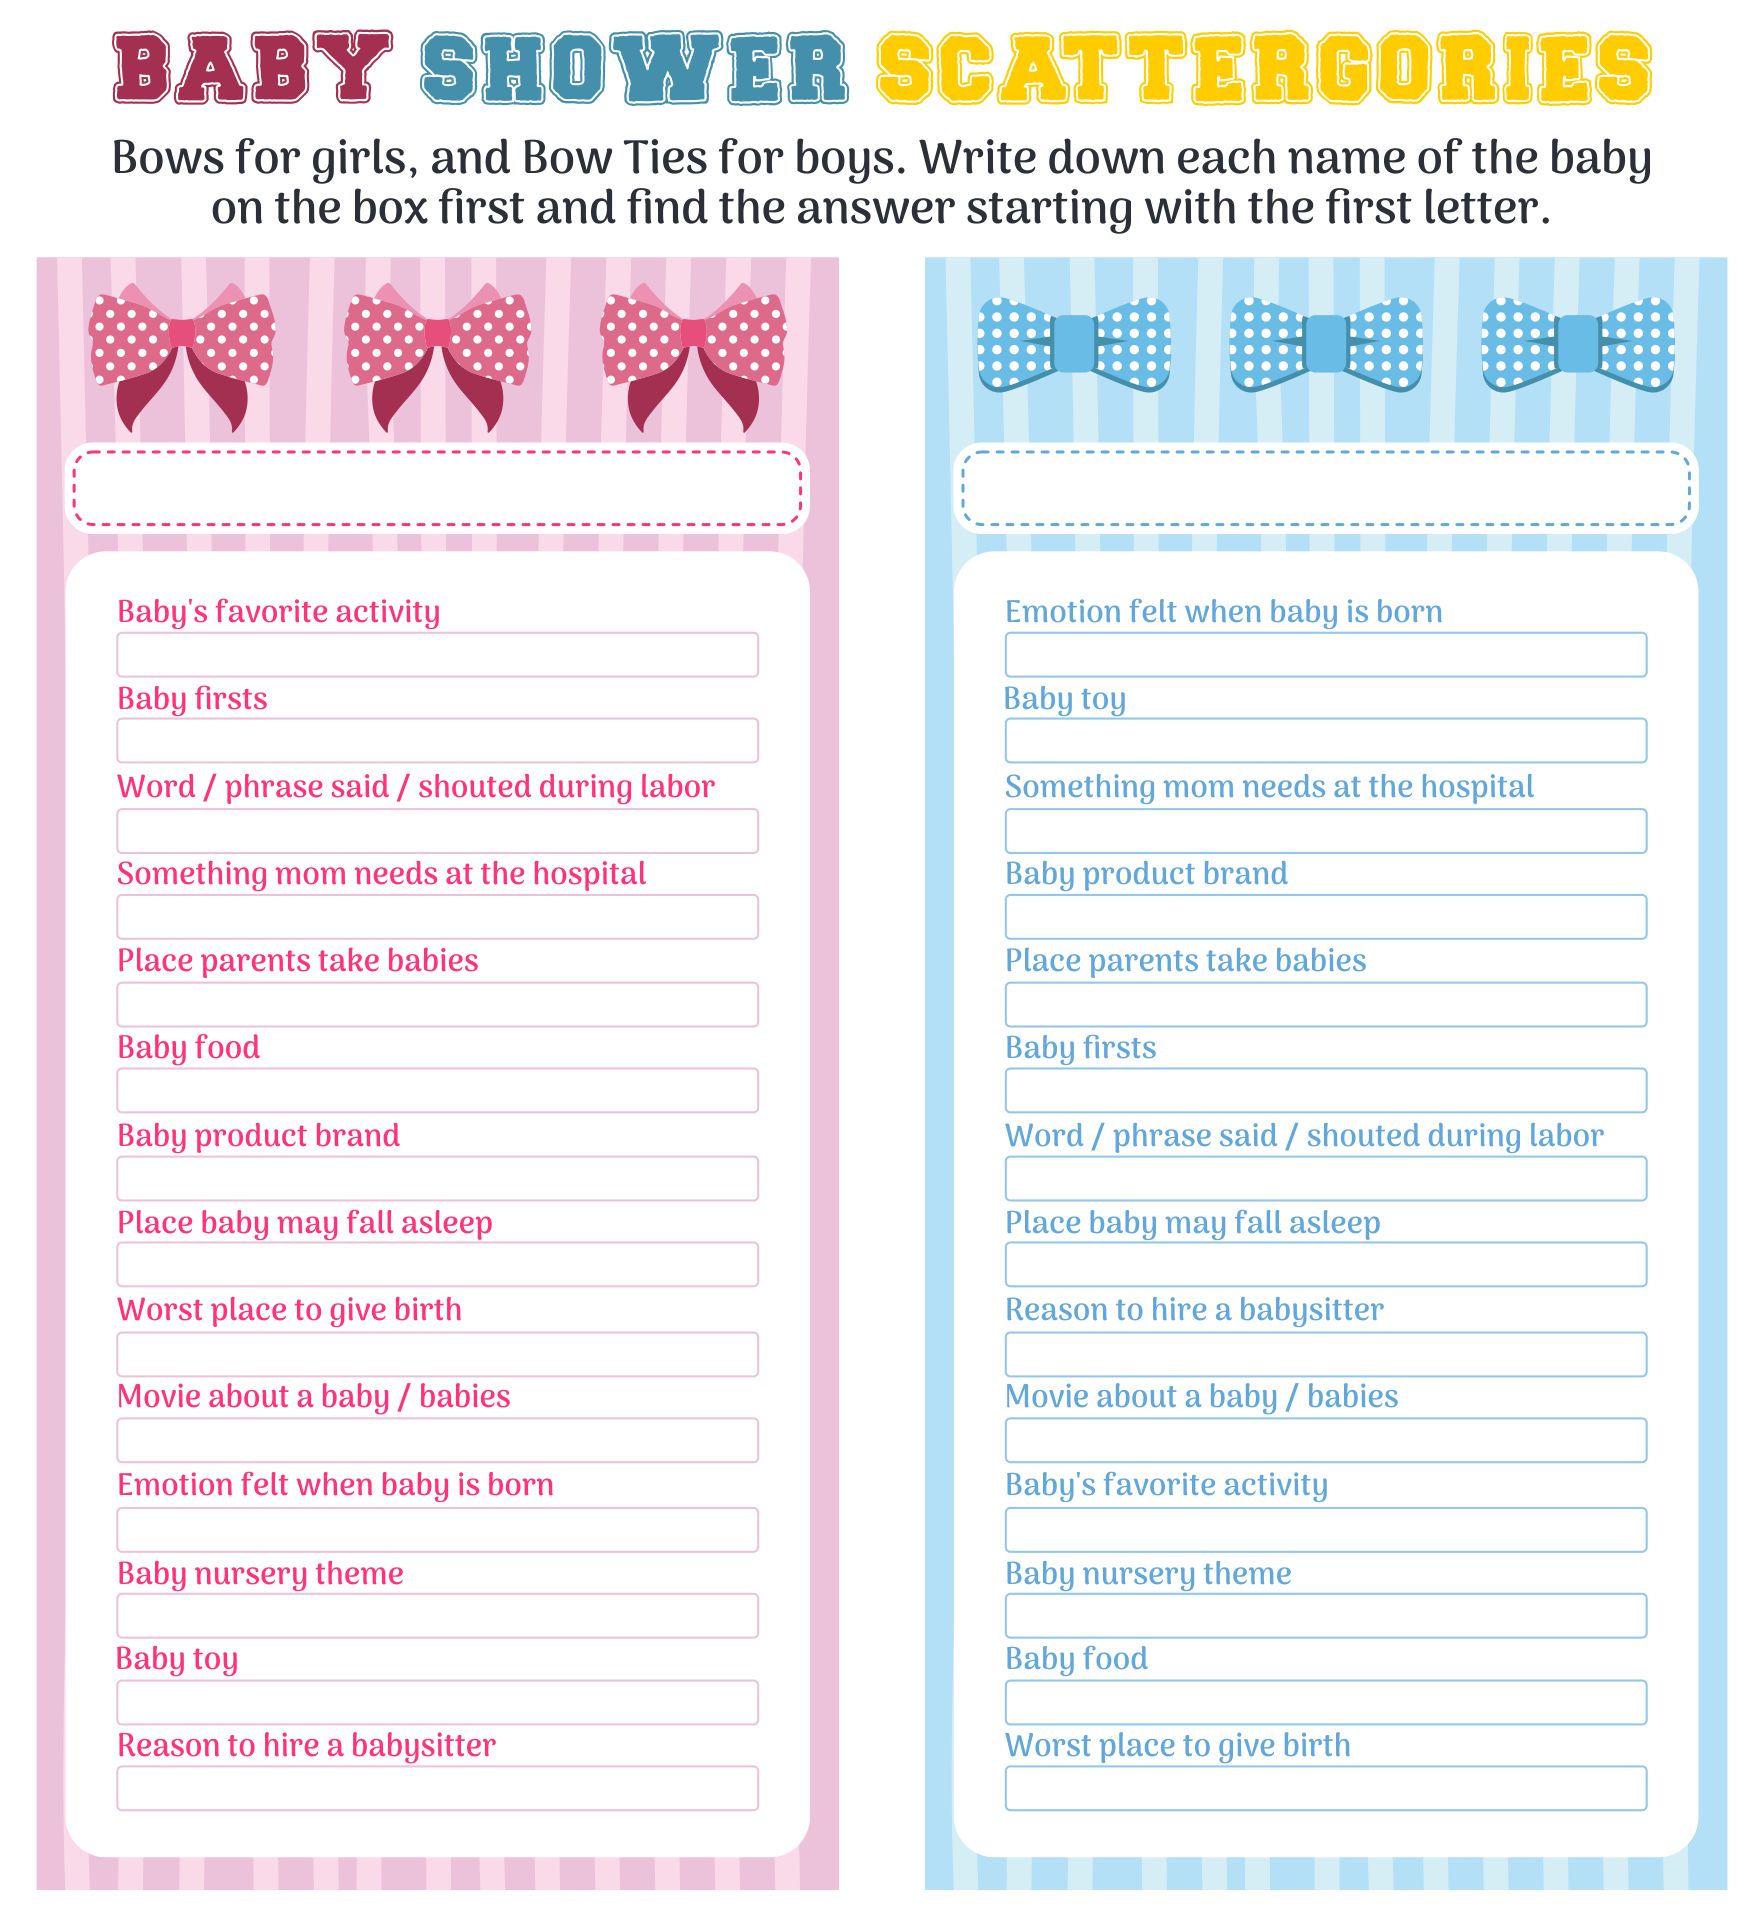 Bows & Bow Ties Baby Shower Games Printable